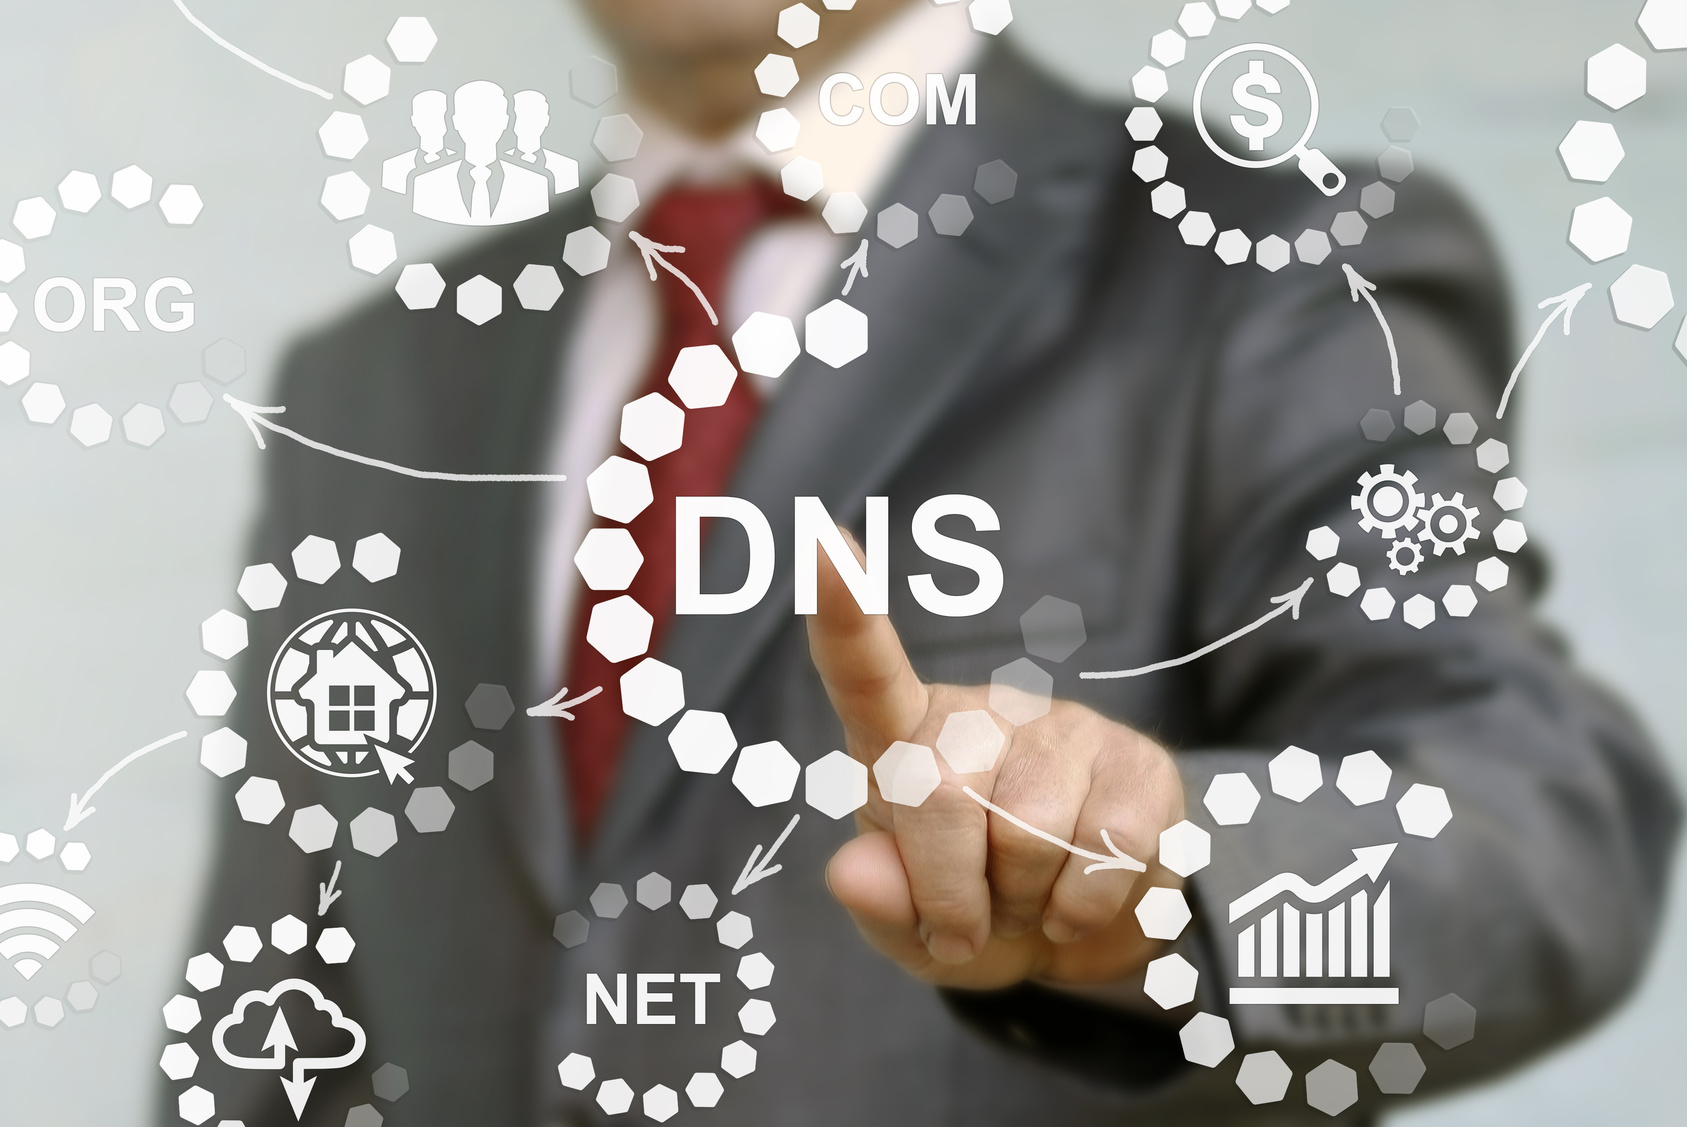 Blurry body shot of man in a suit reaching forward with index finger to click on the words, DNS, which is surrounded by various illustrations to depict what DNS involves.